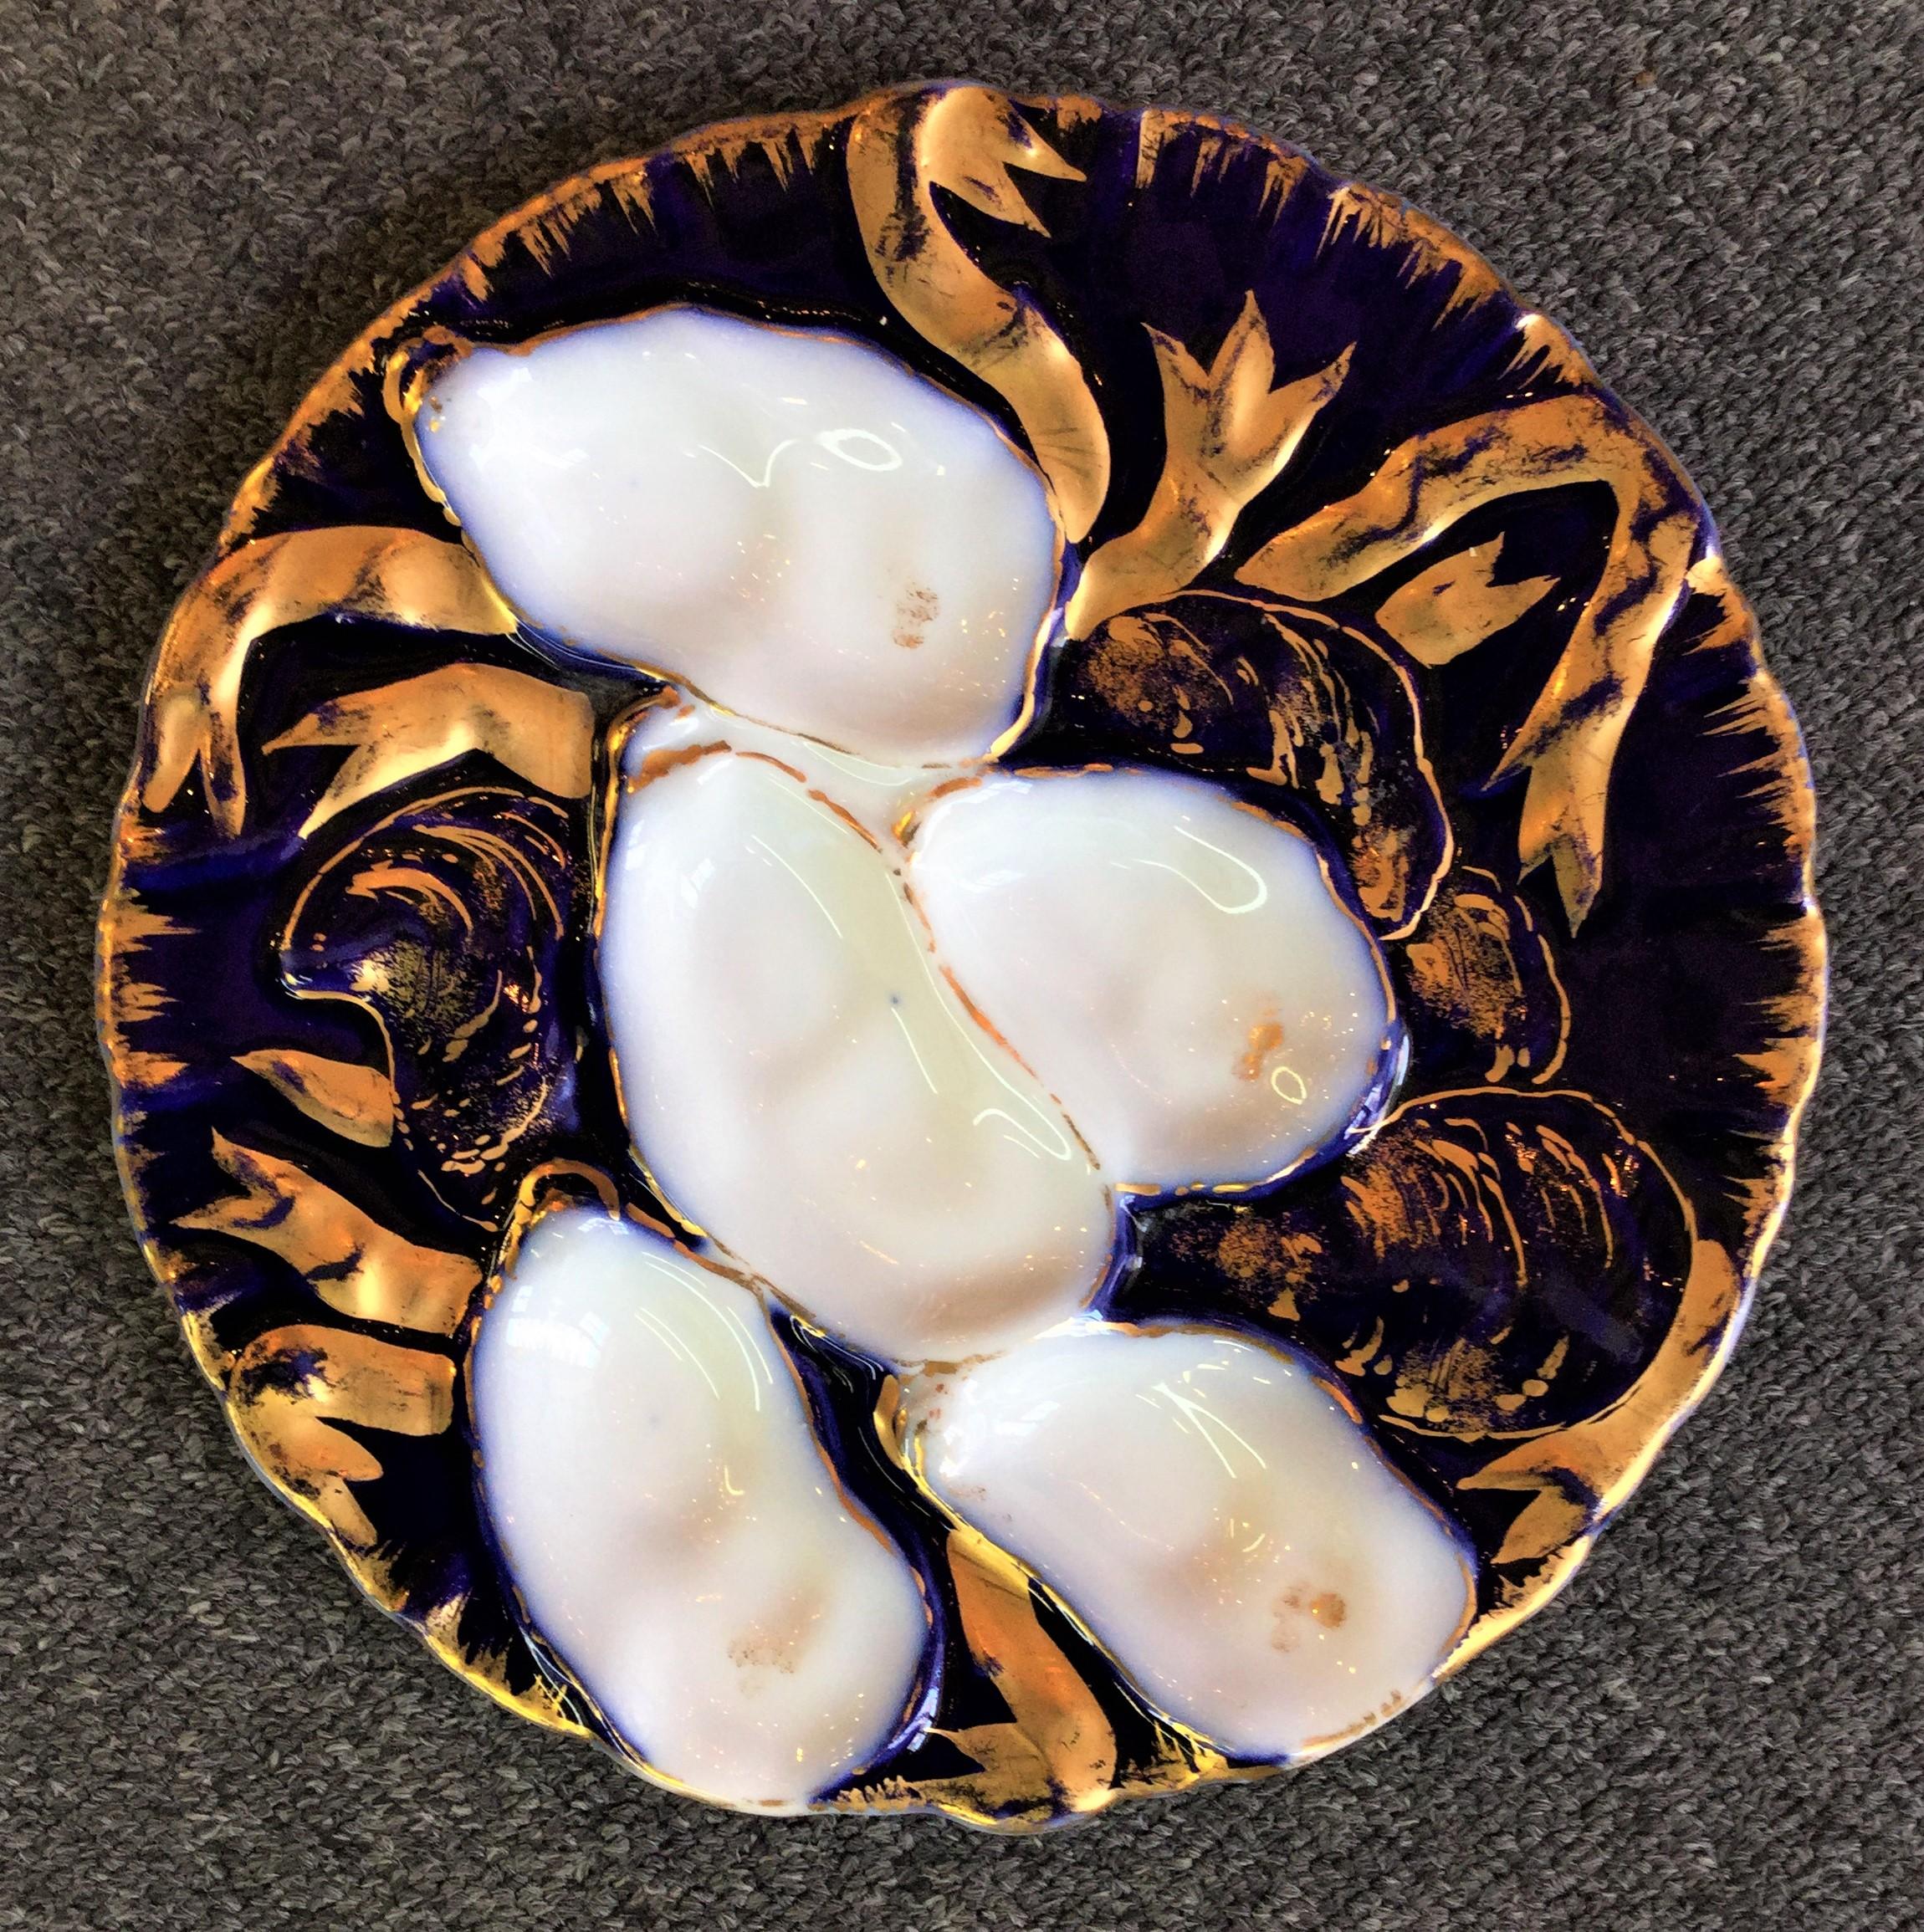 Antique French porcelain Turkey pattern oyster plate made for D. Collamore Co., circa 1890-1900.